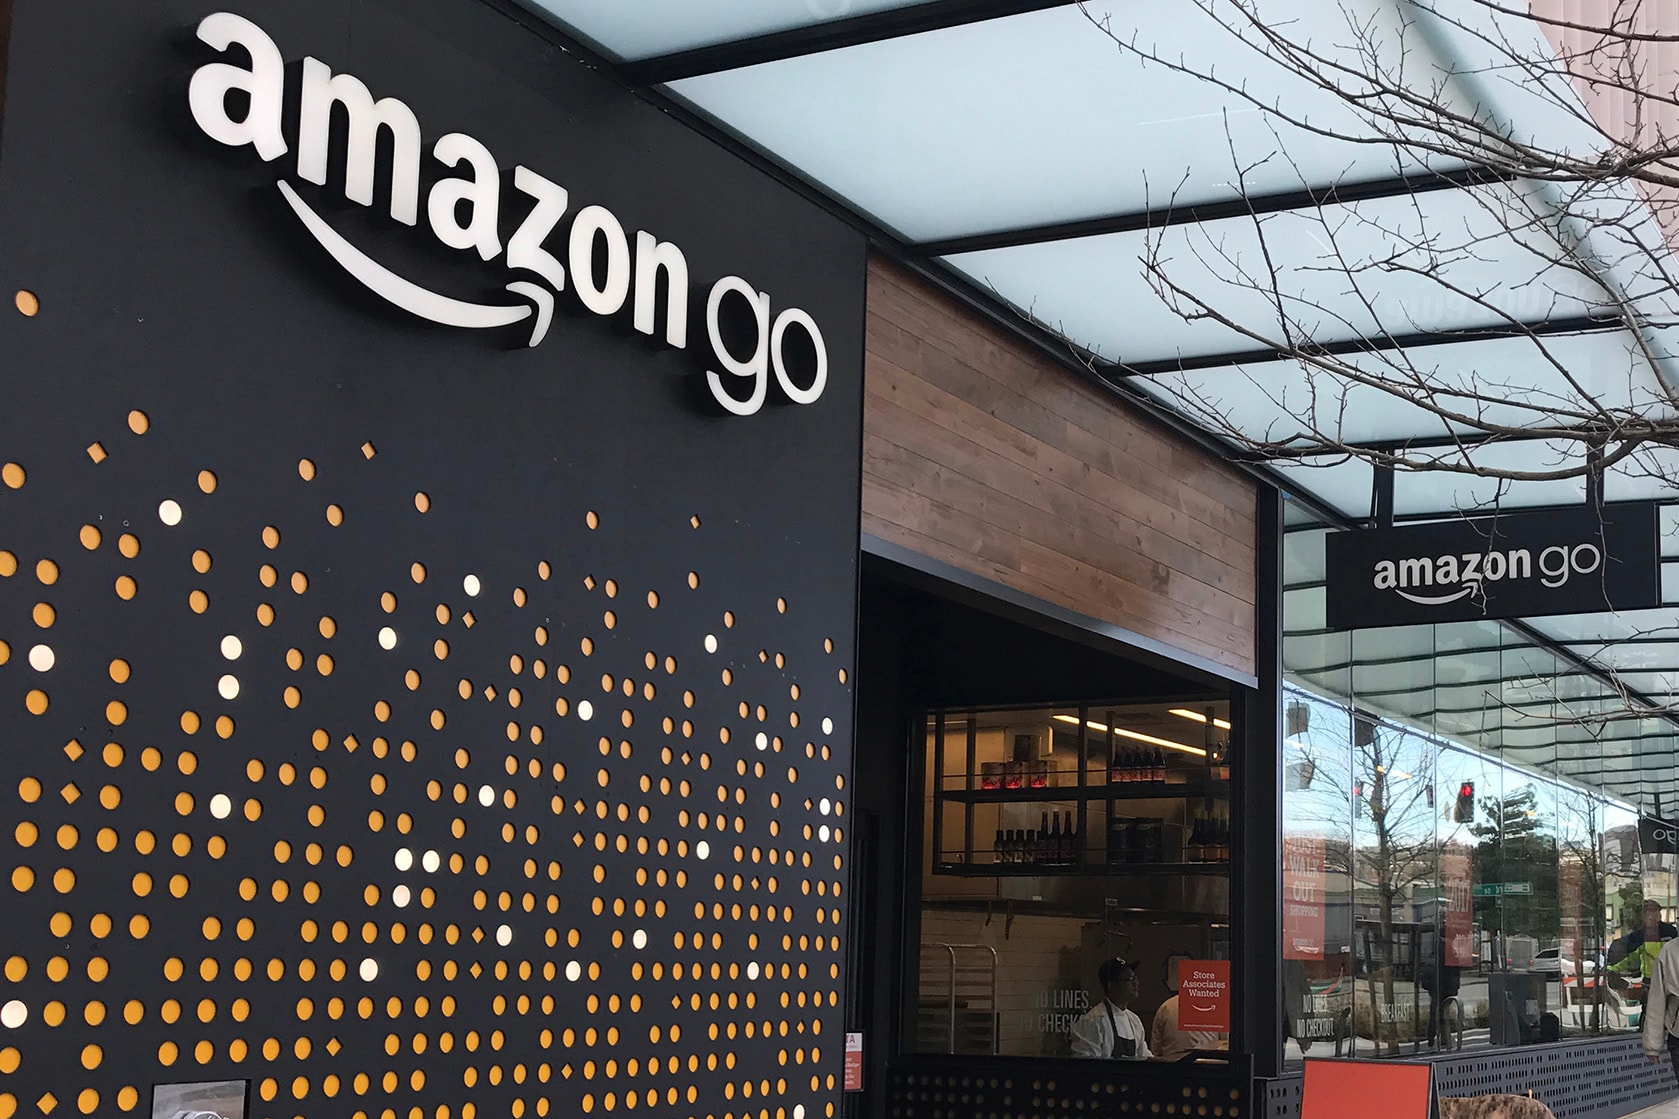 Amazon Go Arriving Chicago San Francisco Grocery Store Online Retailer Purchase Products Cashier Checkout Station